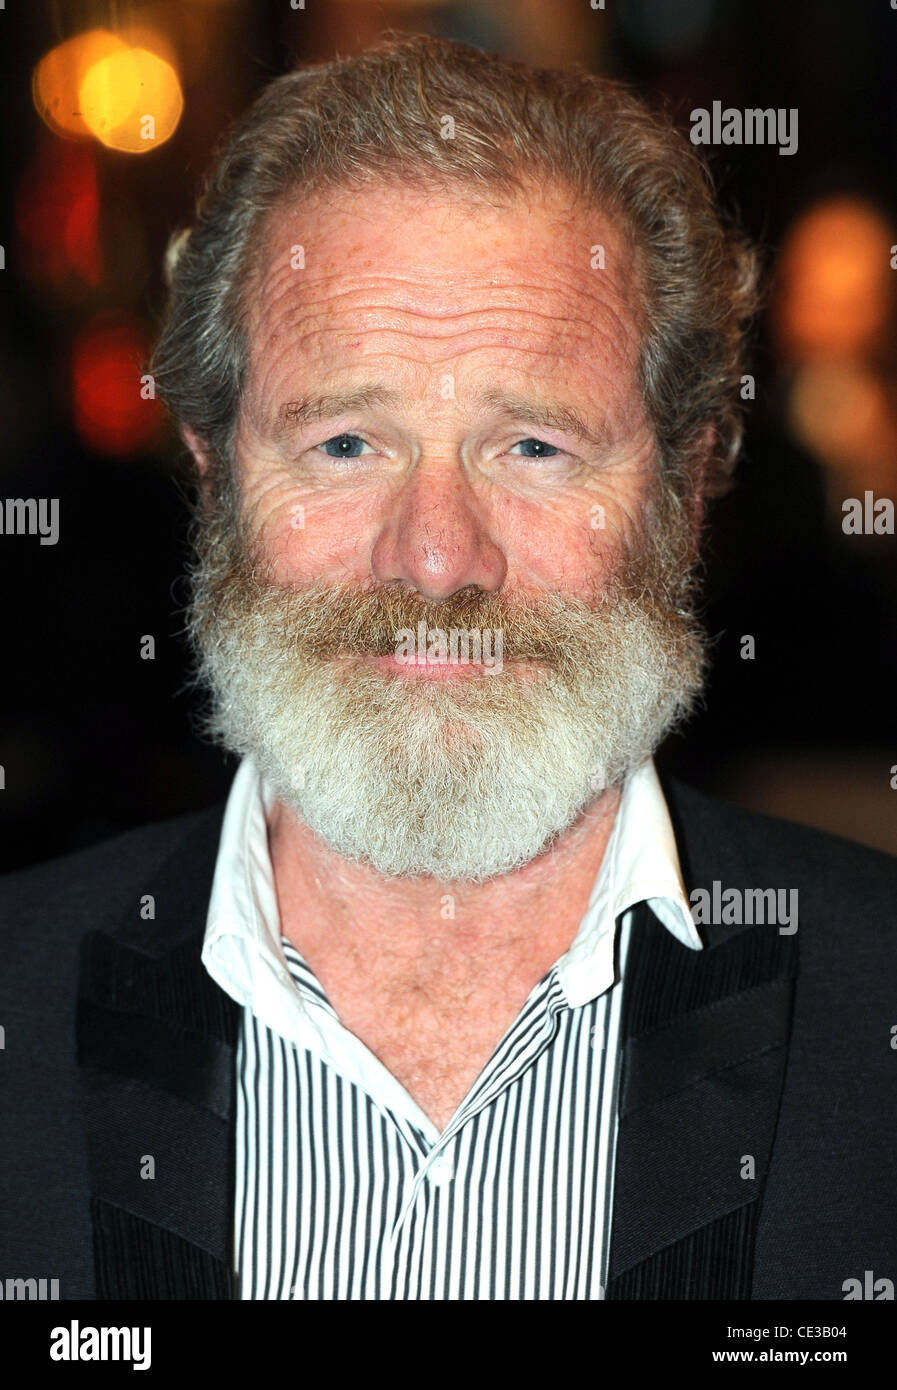 Peter Mullan 54th BFI London Film Festival: 'Neds' UK film premiere held at the Vue West End. London, England - 20.10.10 Stock Photo